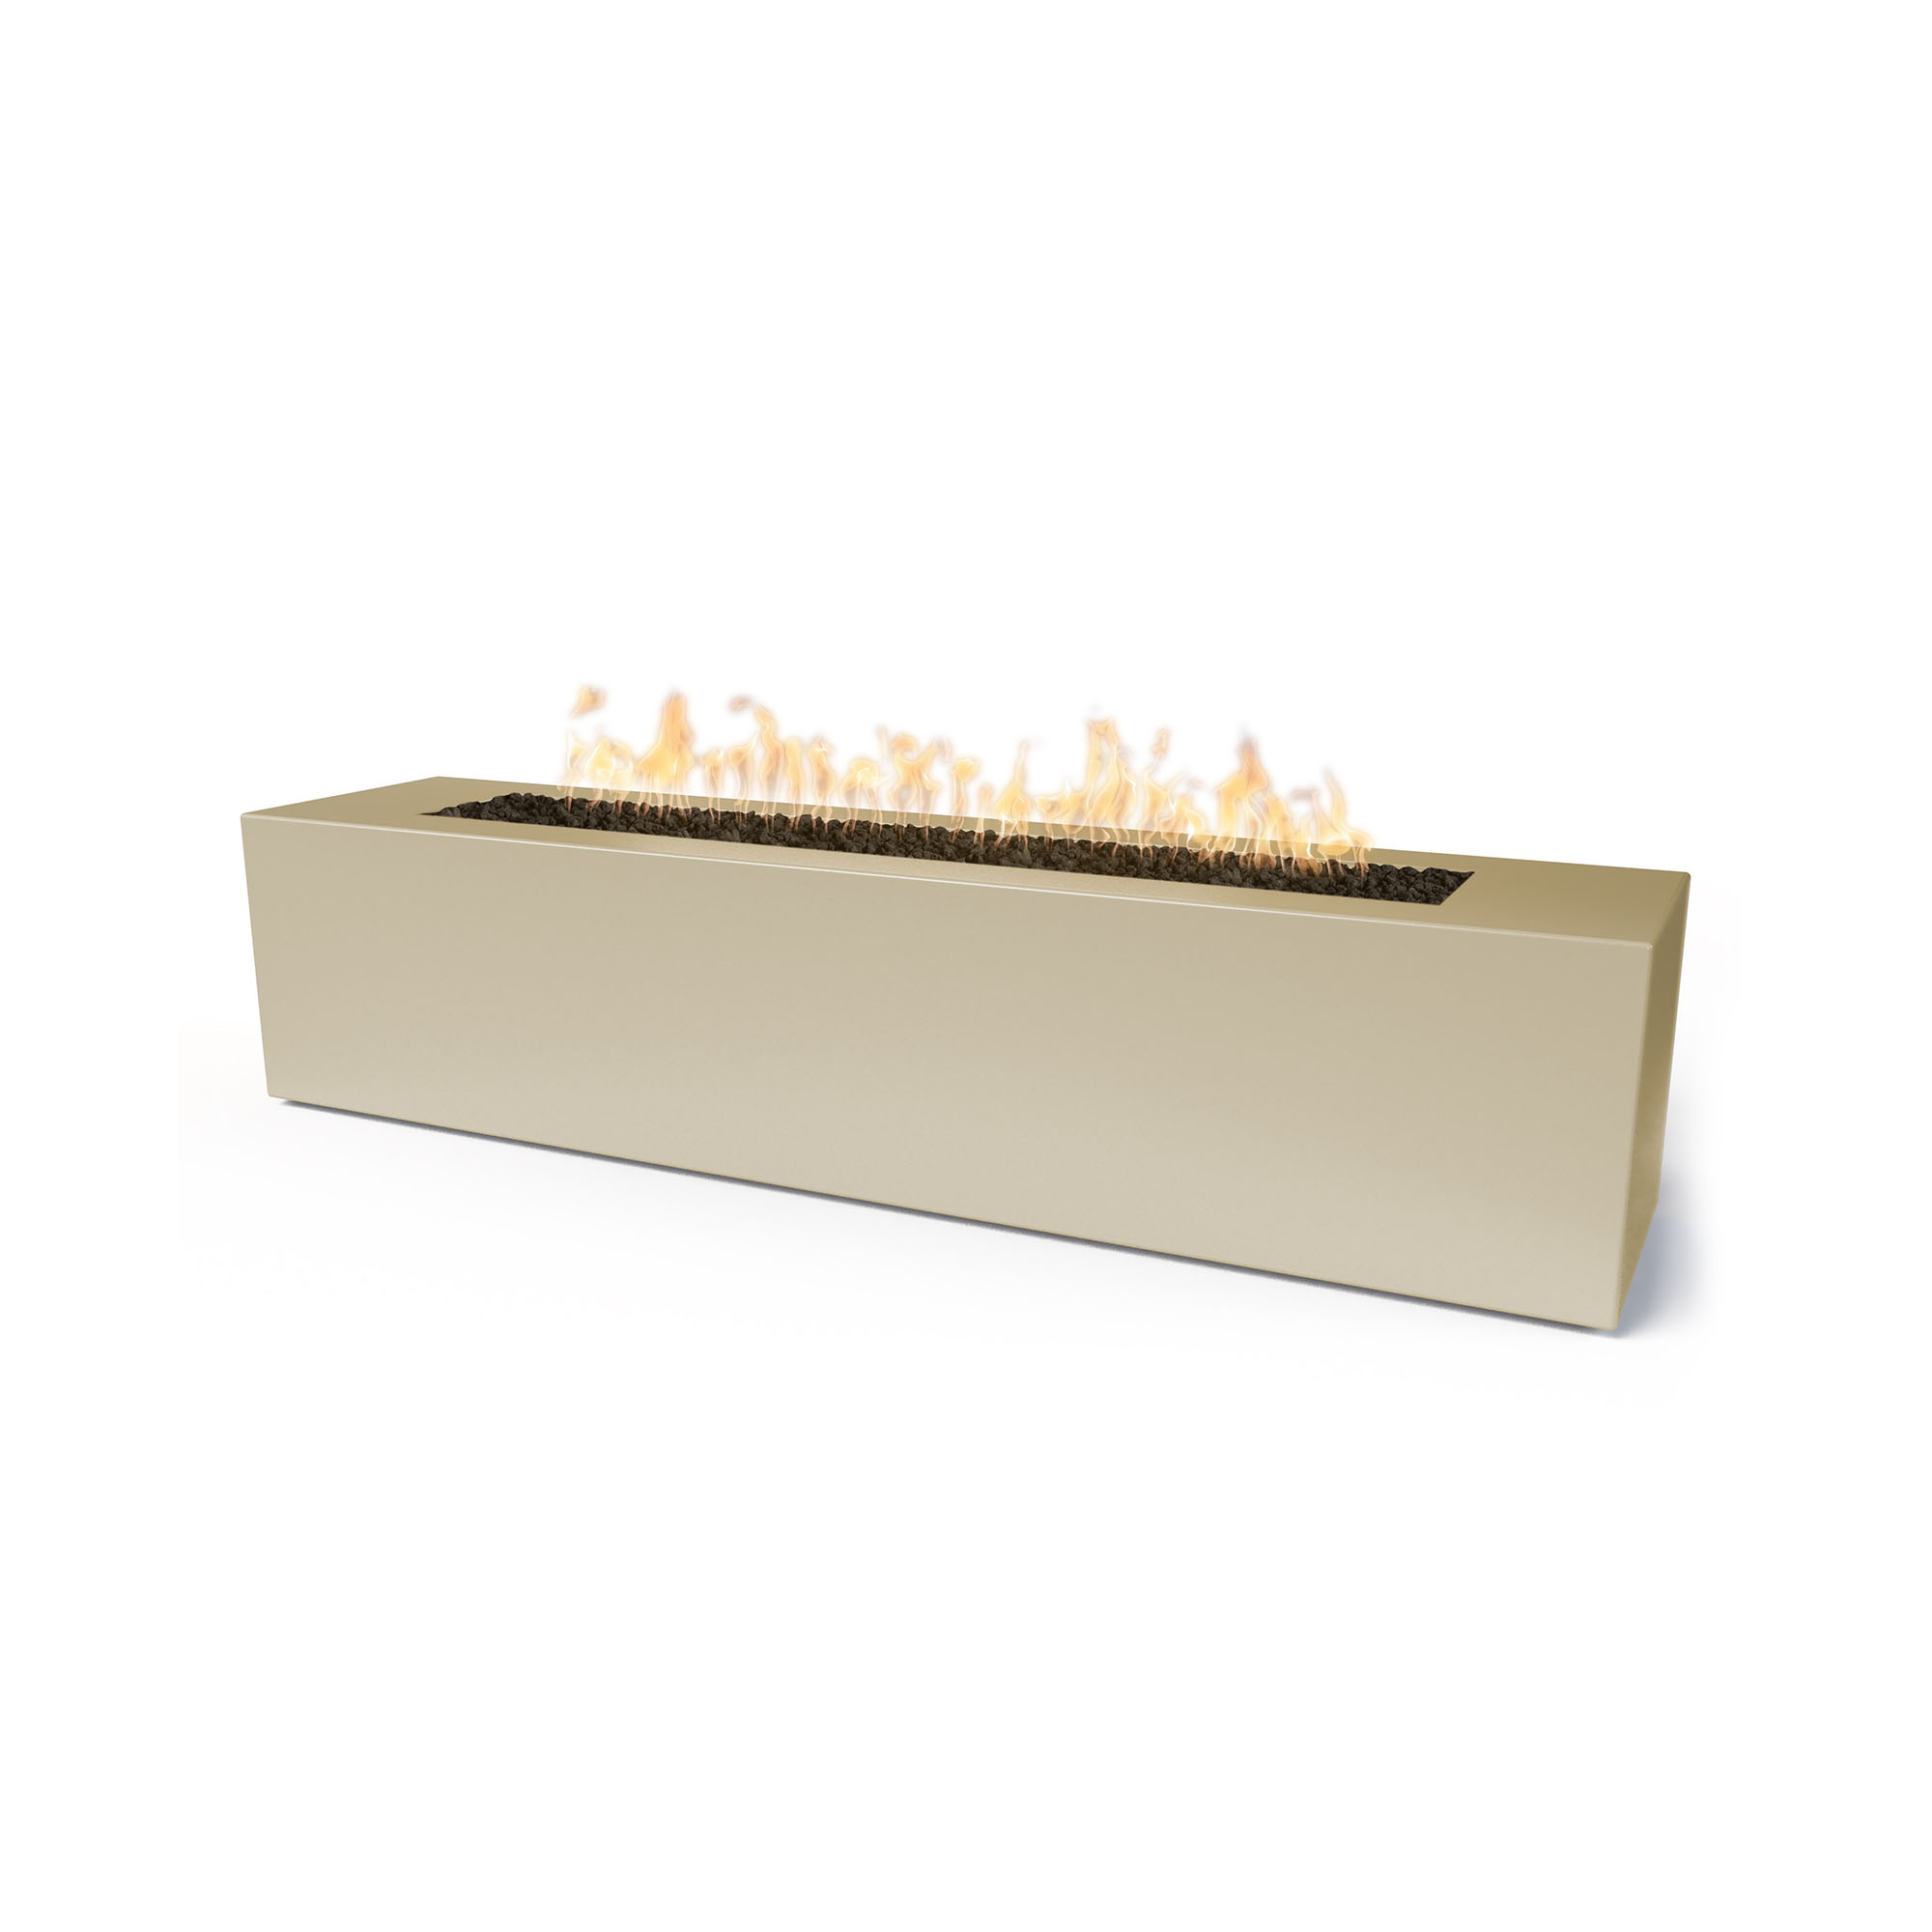 "Carmen" Linear Concrete Fire Pit 72 x 16 inch The Outdoor Plus (TOP Ignition Options: Match Lit Ignition, Carmen 72 inch: 16 inches Tall)